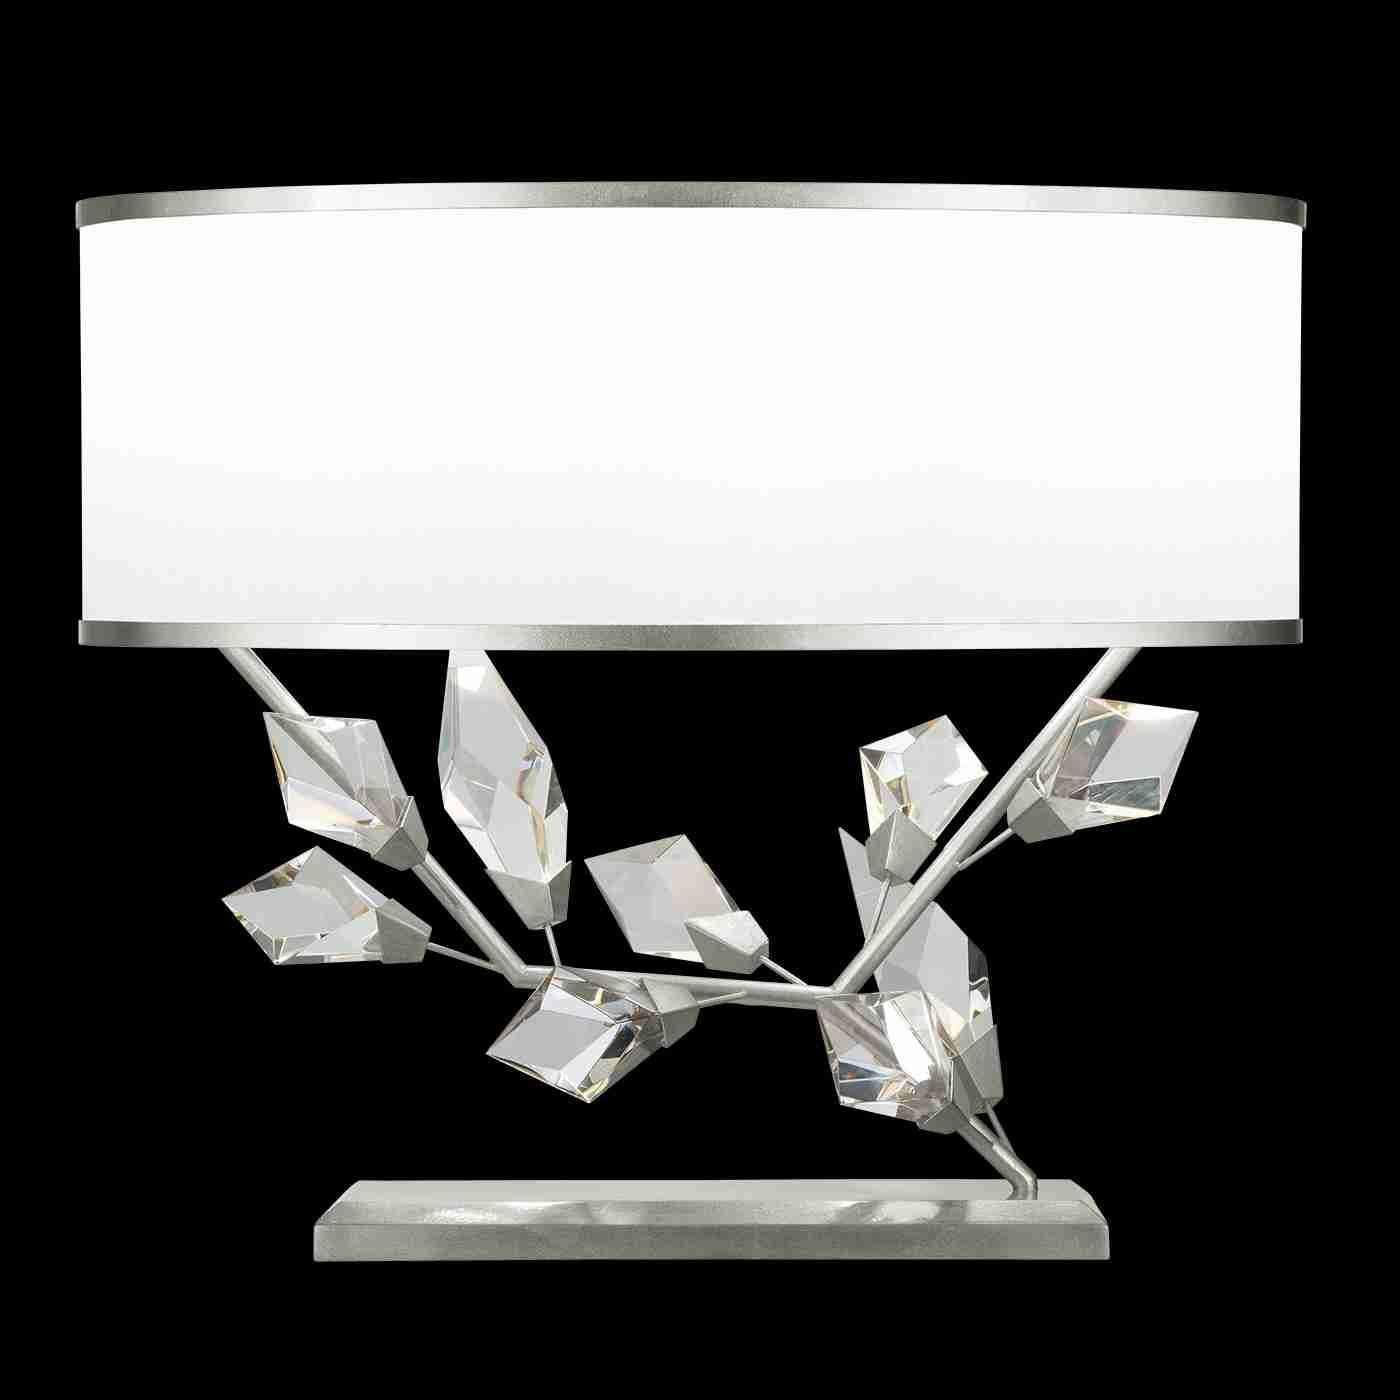 Fine Art Handcrafted Lighting - Foret Table Lamp - Lights Canada